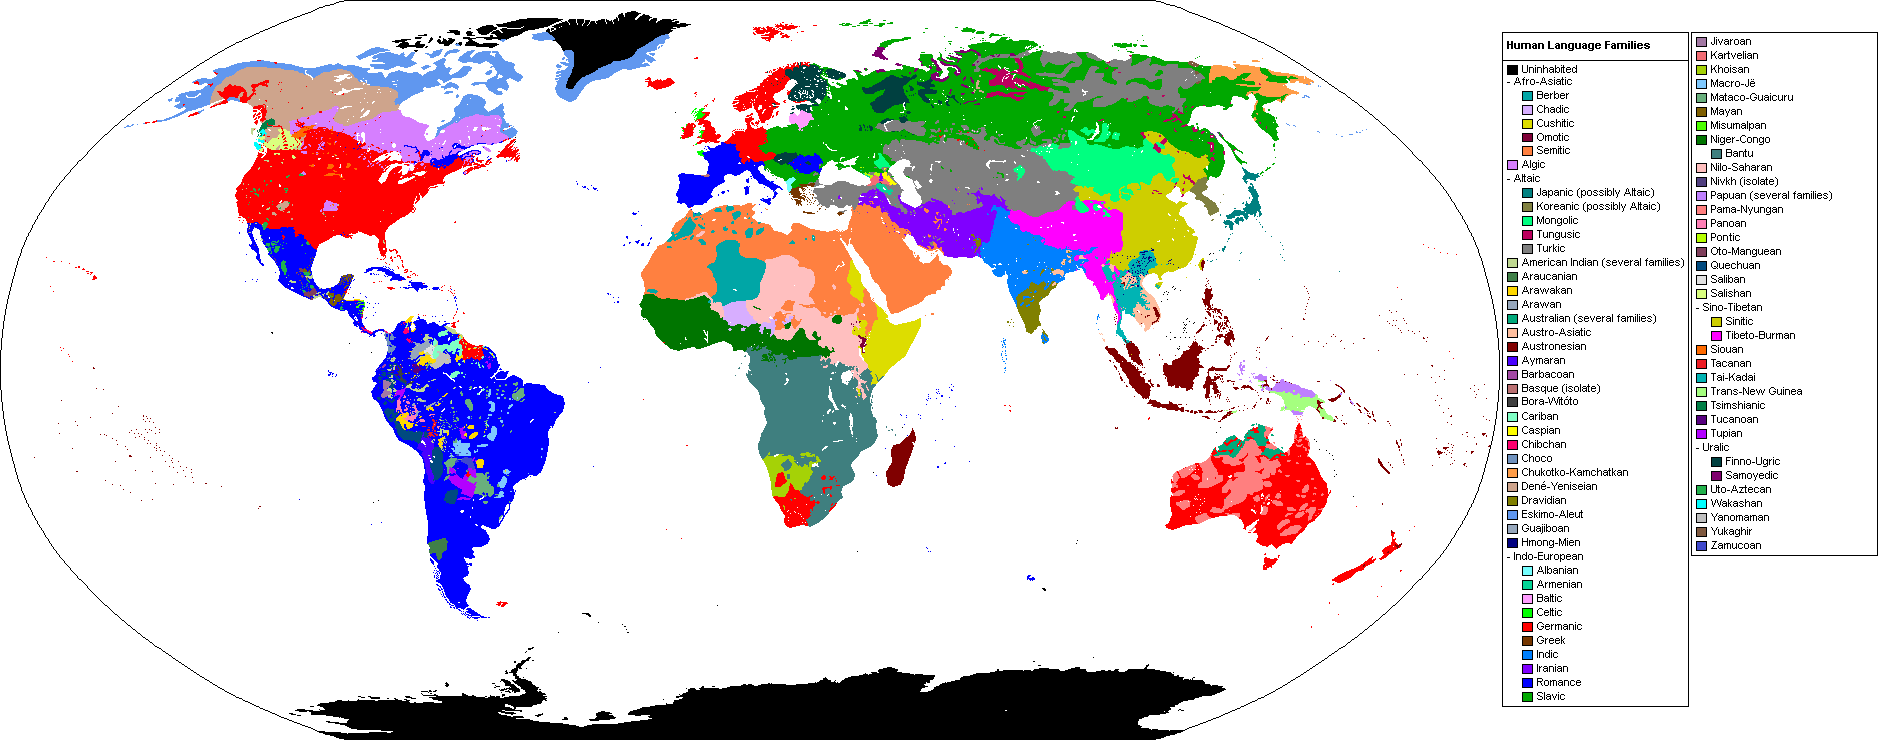 Languages of the World - Linguistics - Research guides at ...